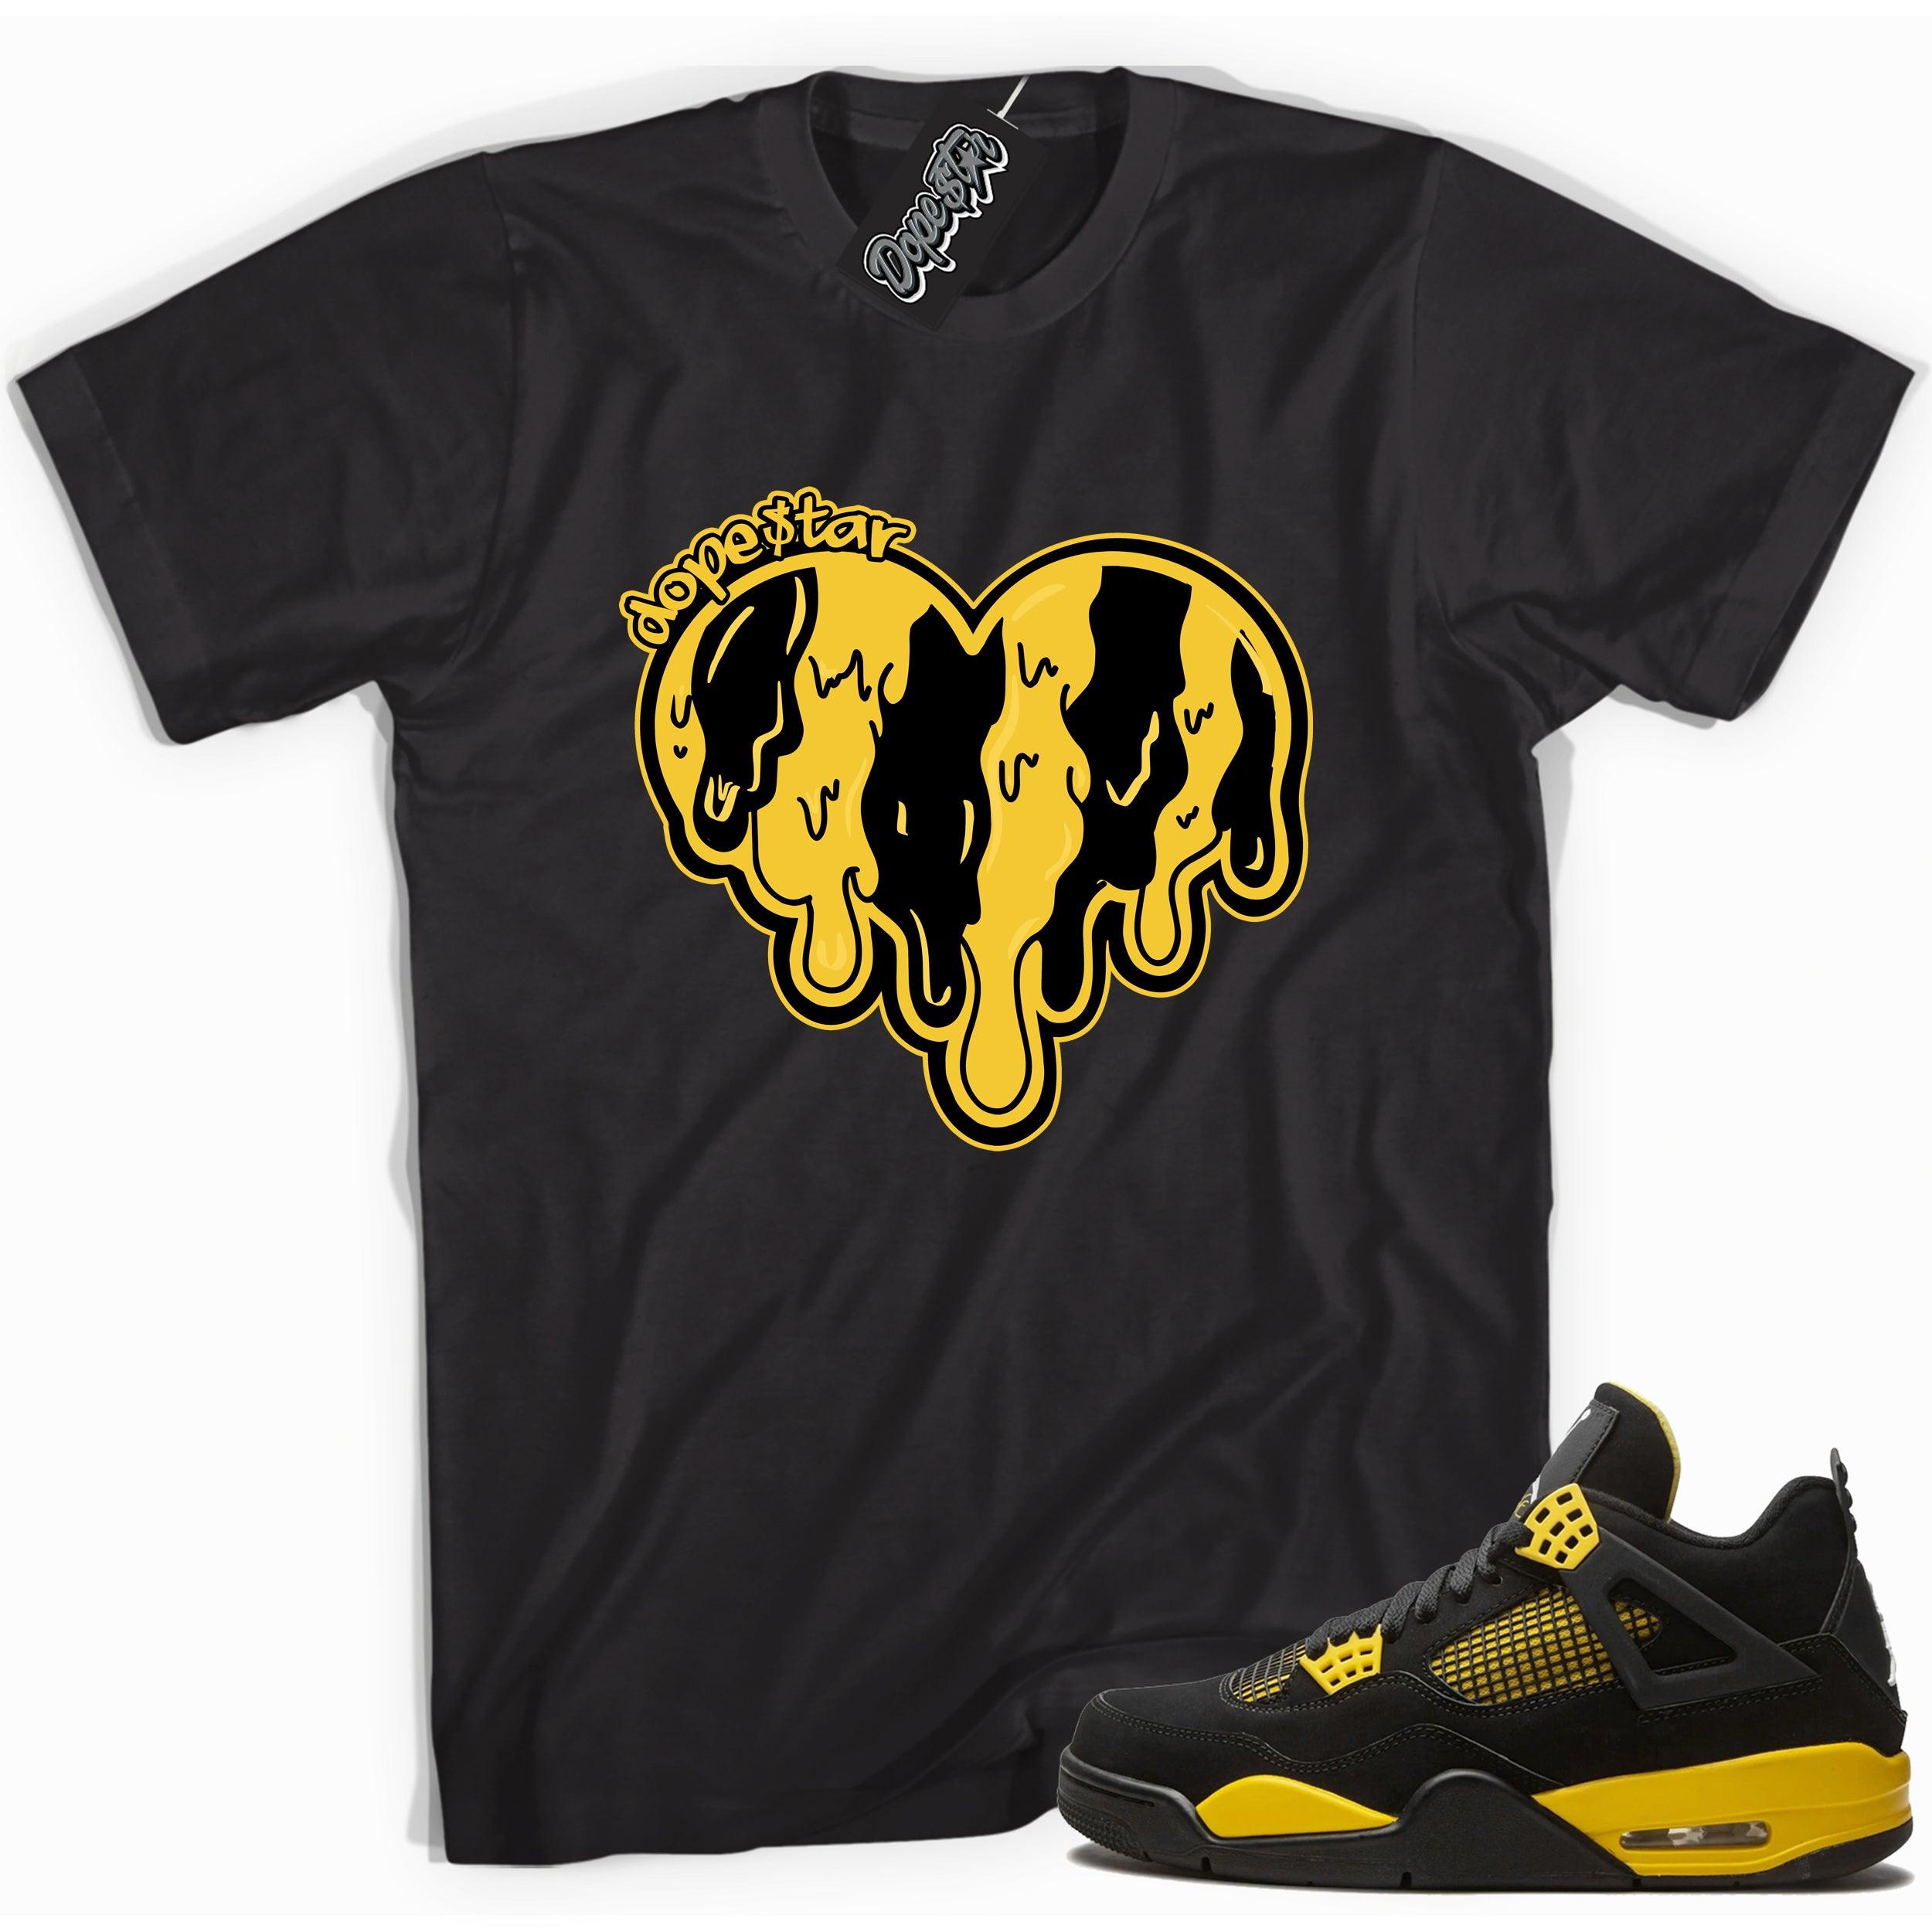 Cool black graphic tee with 'melting heart' print, that perfectly matches  Air Jordan 4 Thunder sneakers